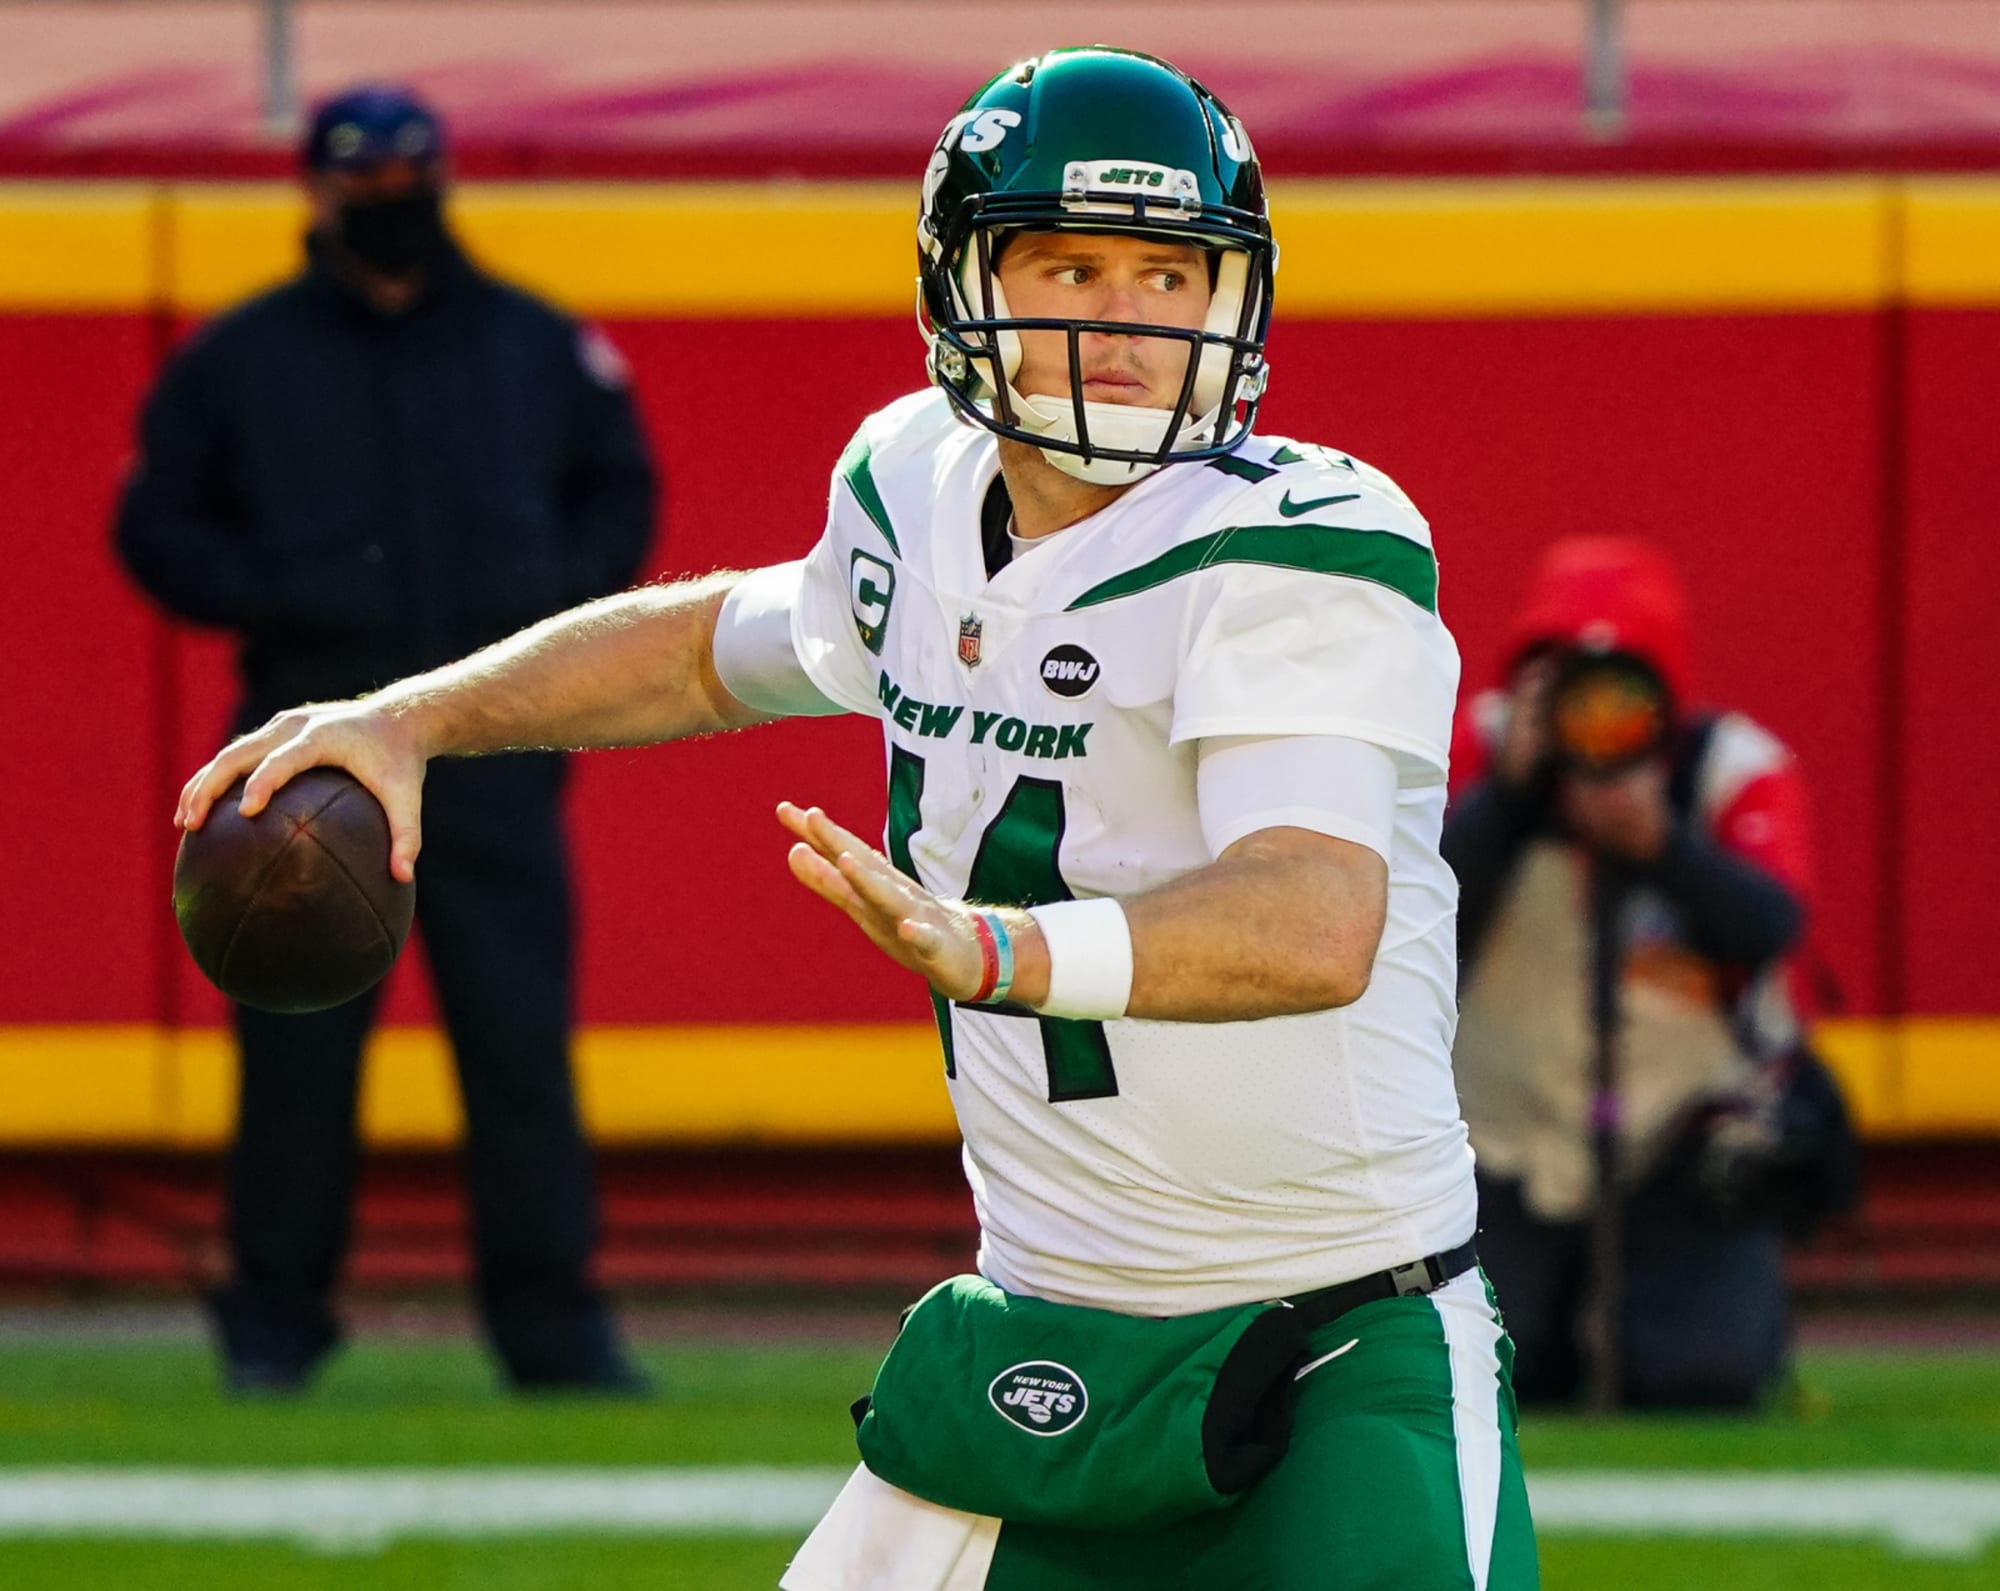 New York Jets 7-round 2021 mock draft: Do the Jets stick with Darnold?